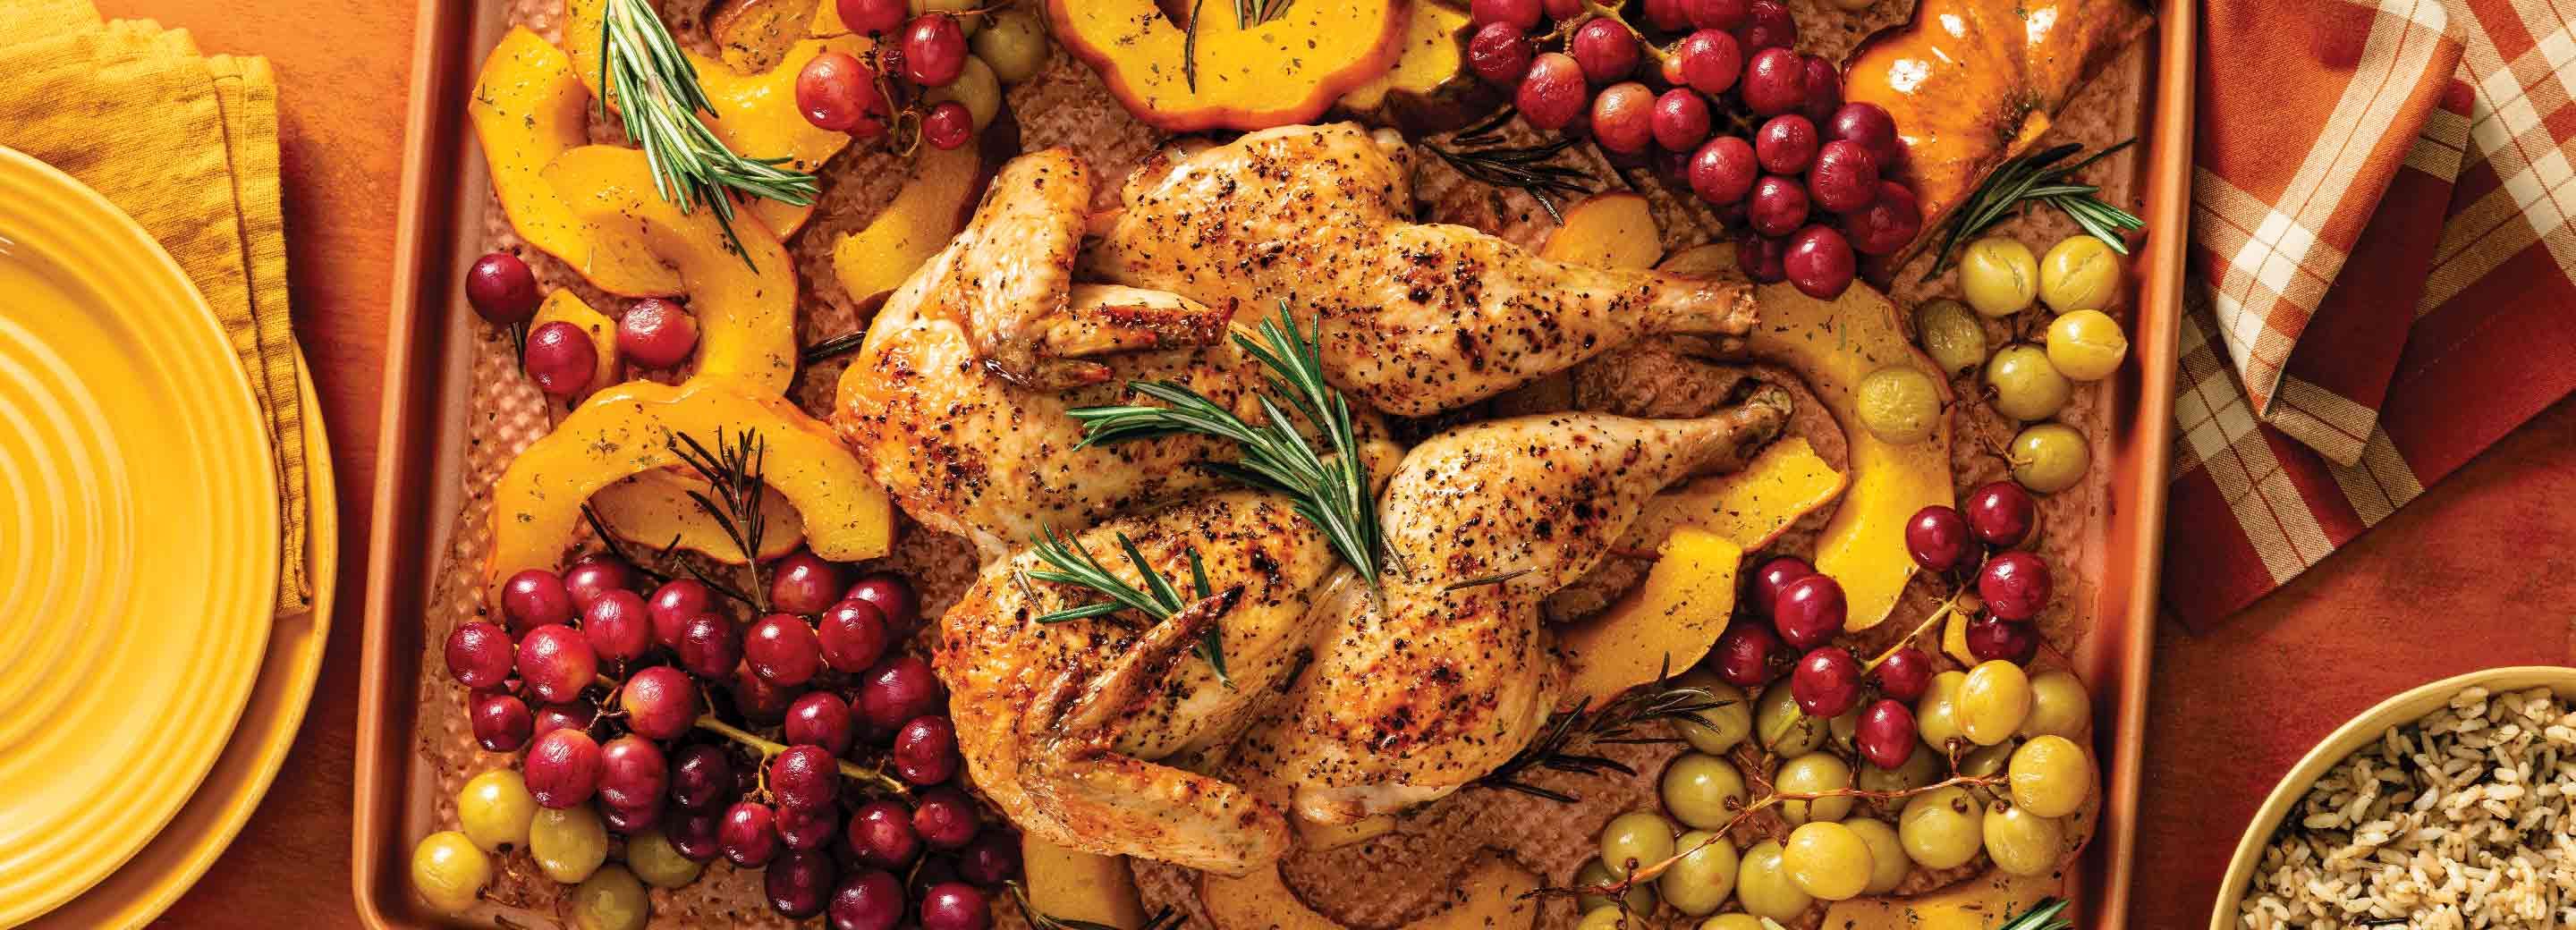 Spatchcock Chicken with Roasted Grapes and Squash